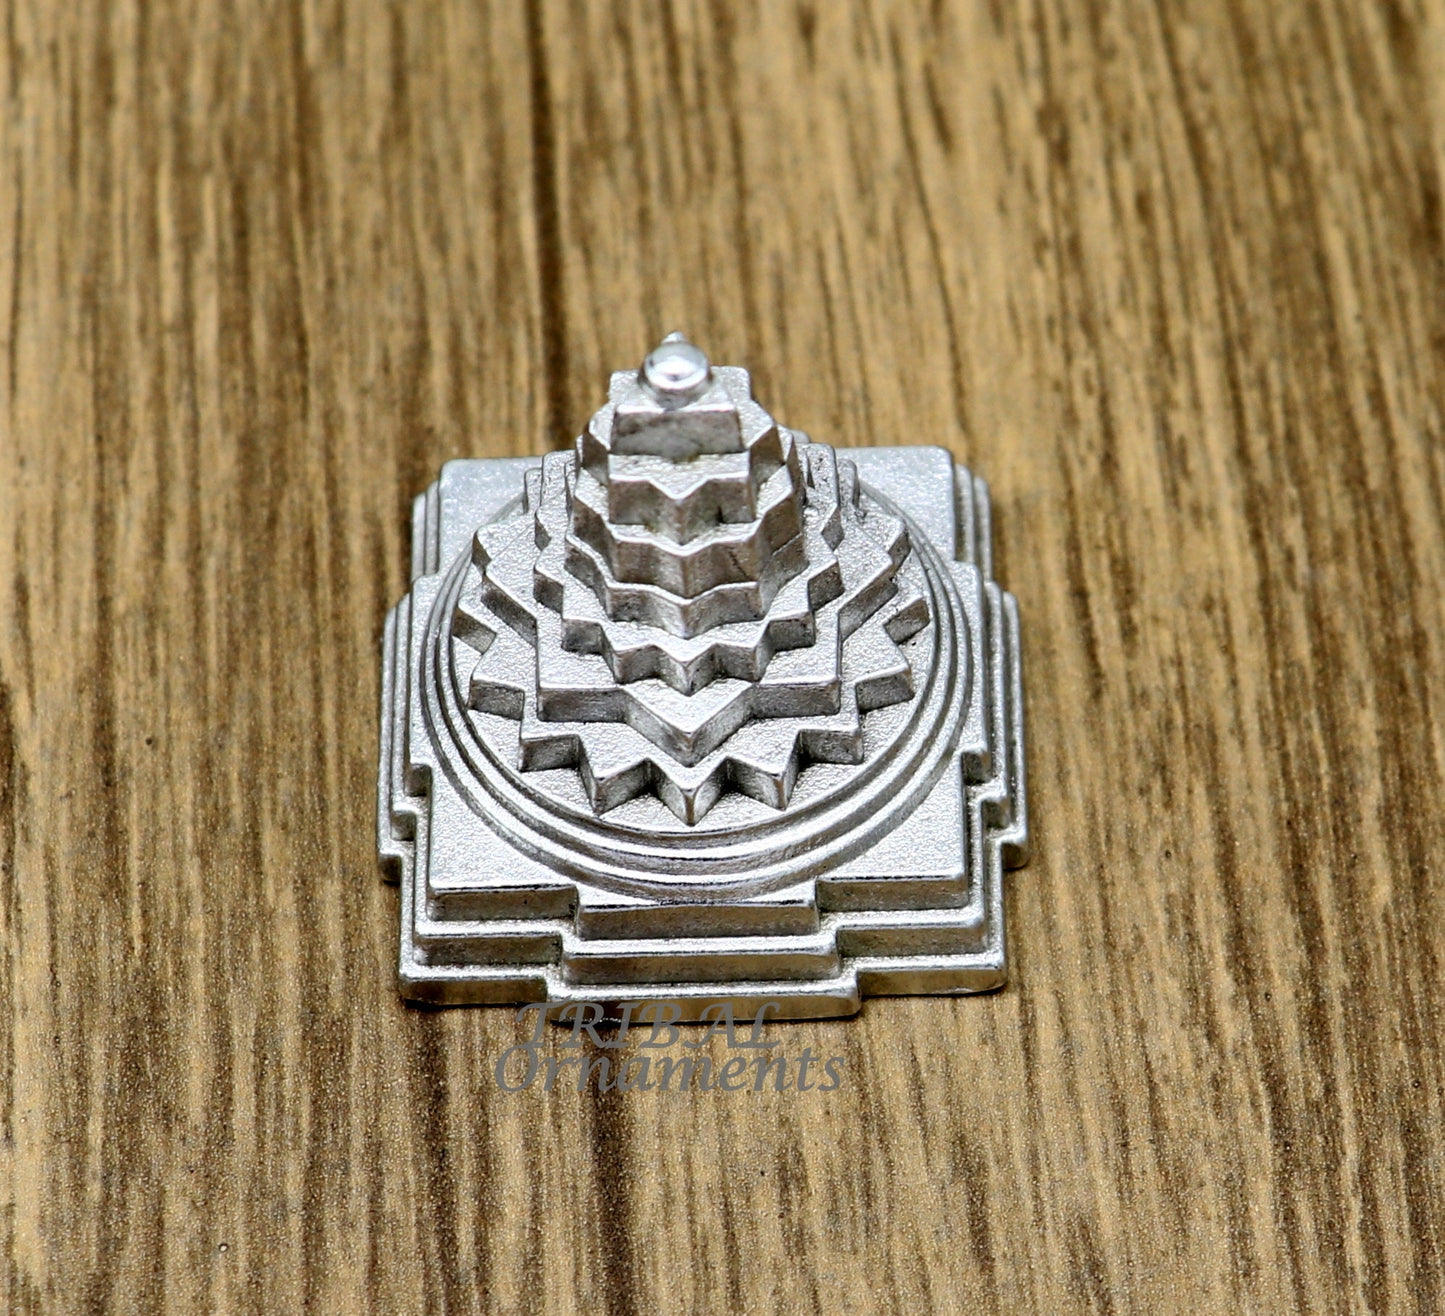 Divine Solid mercury 3d pyramid of shree yantra, Parad Mahalakshmi Yantram figurine for puja at home best way for wealth and prosperity MA05 - TRIBAL ORNAMENTS